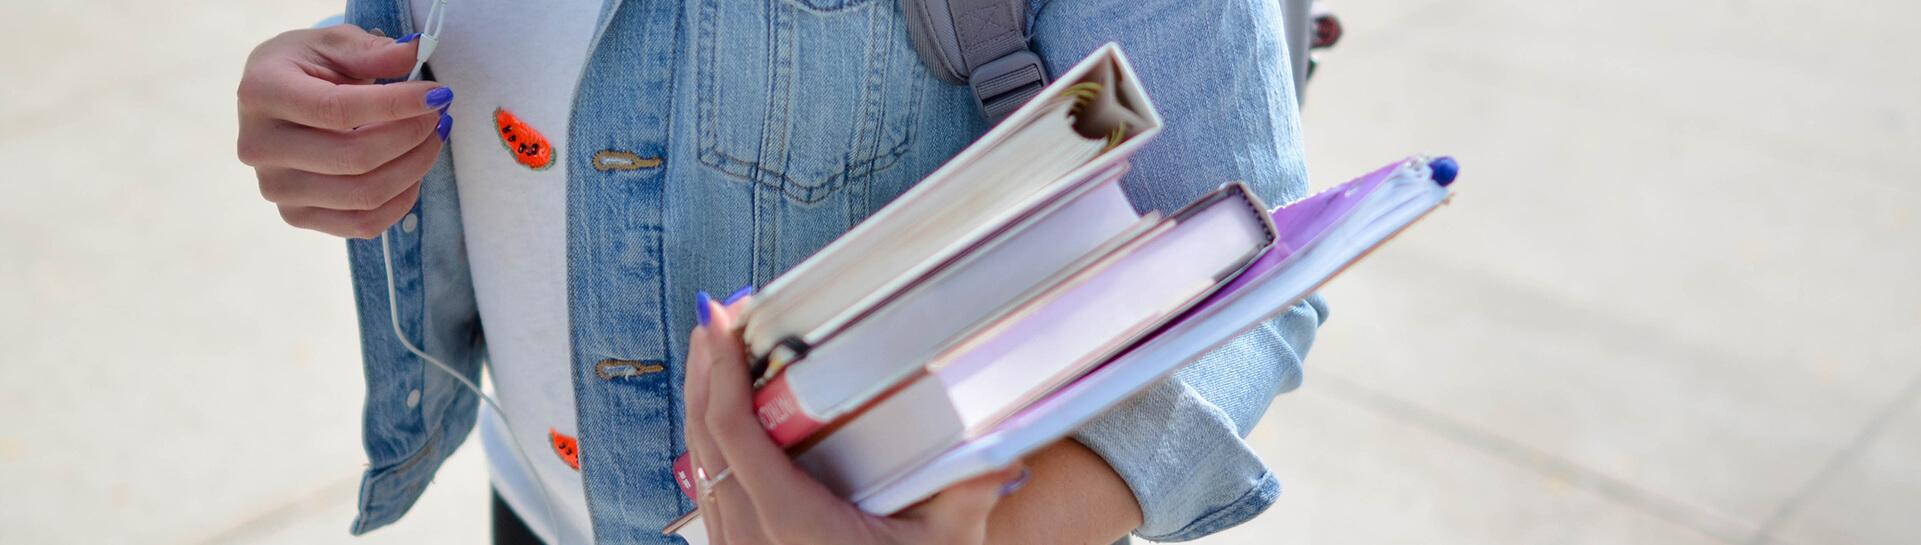 A student carrying books